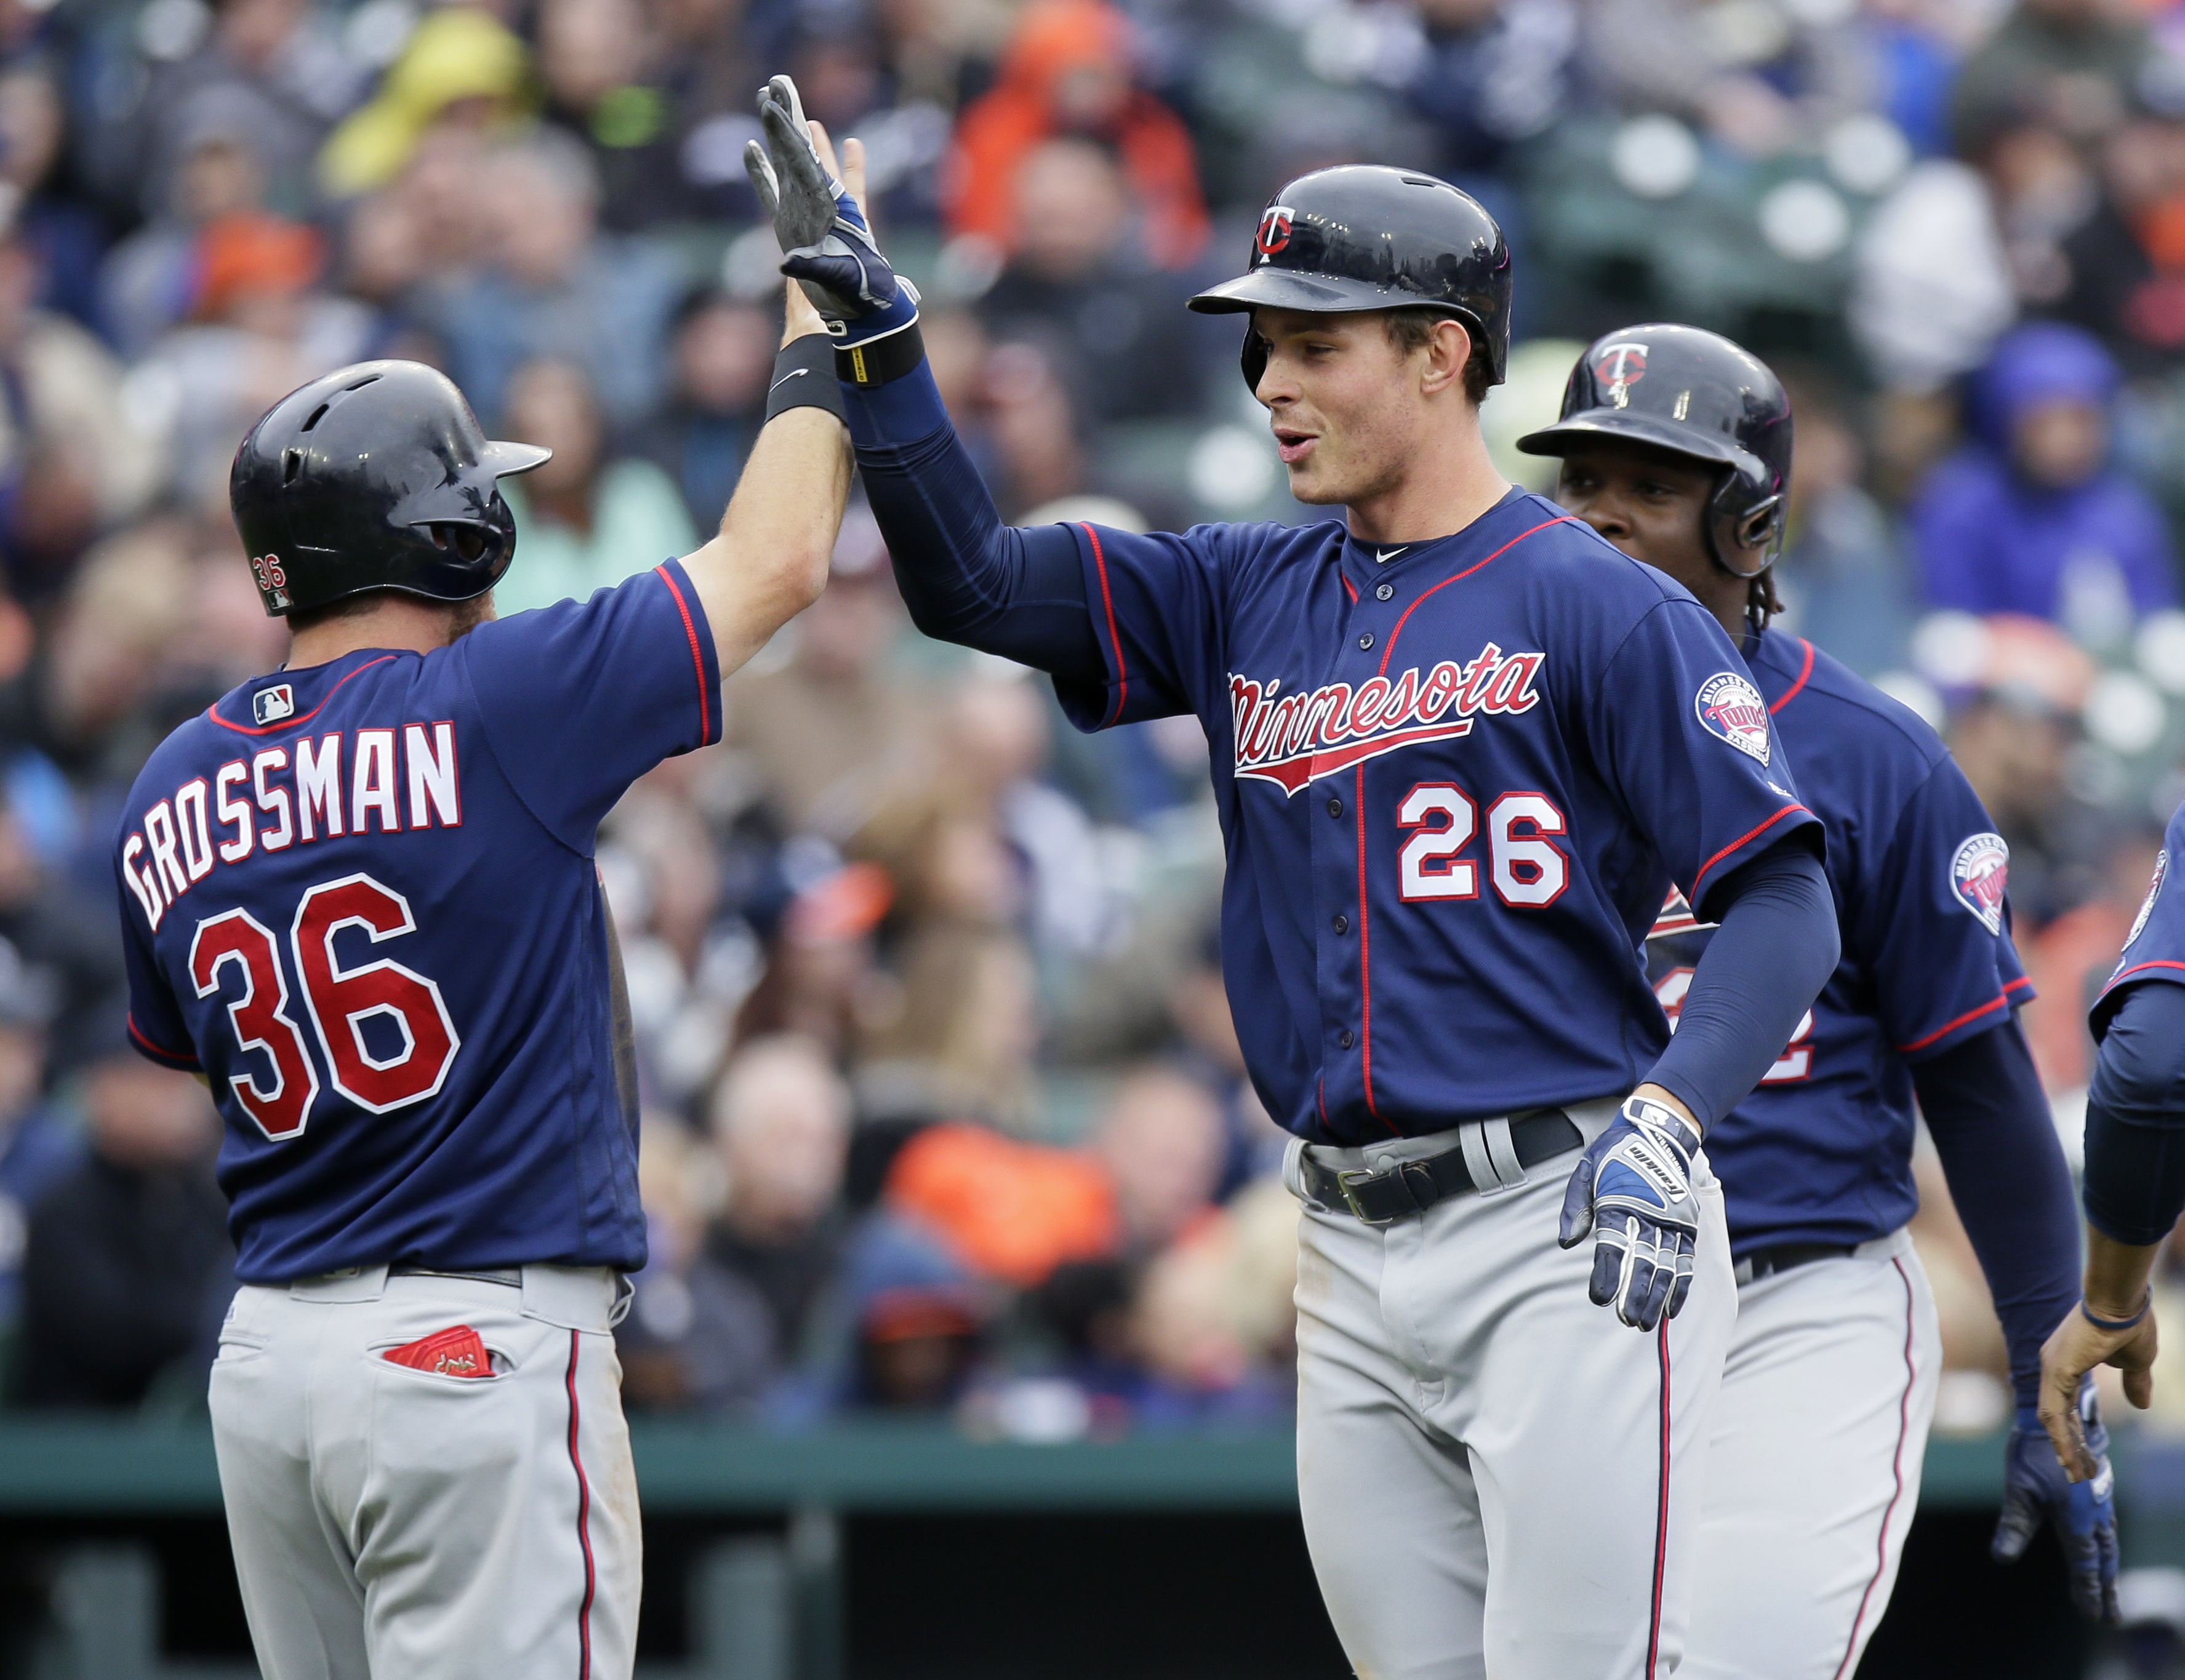 Twins 11, Tigers 5 - The Twins getaway with some serious muscle